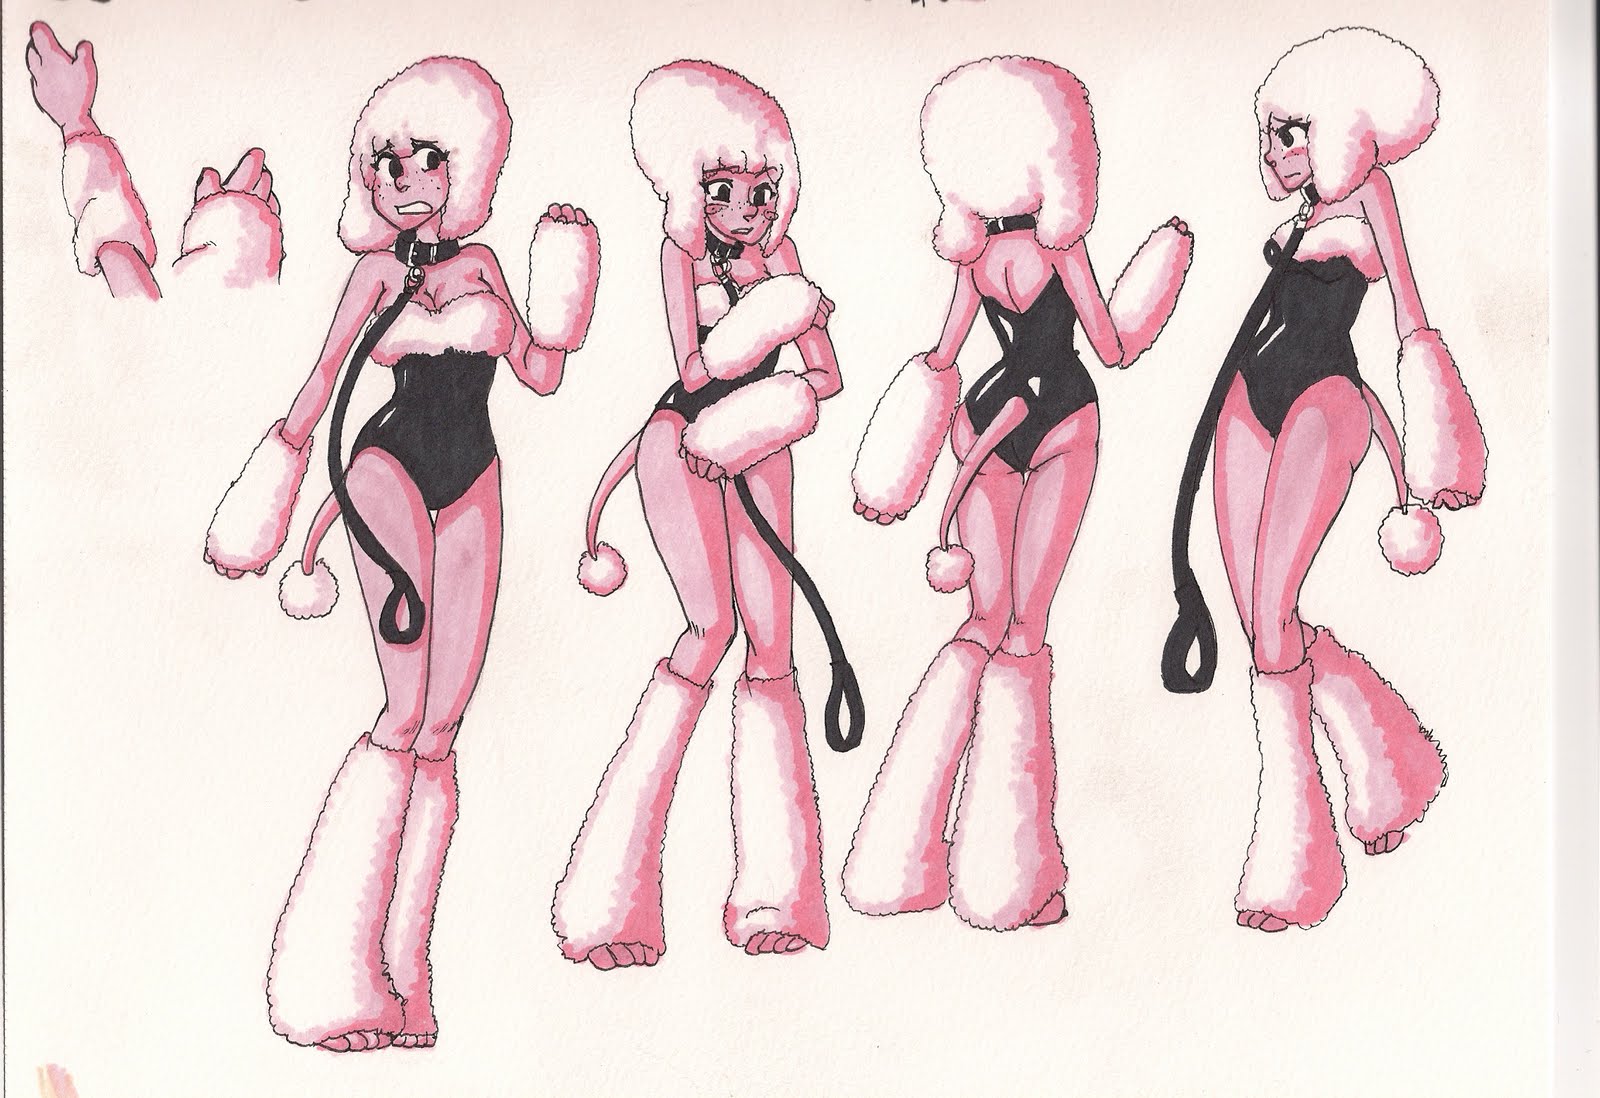 TransformKnightmare - Poodle-girl by Stages.